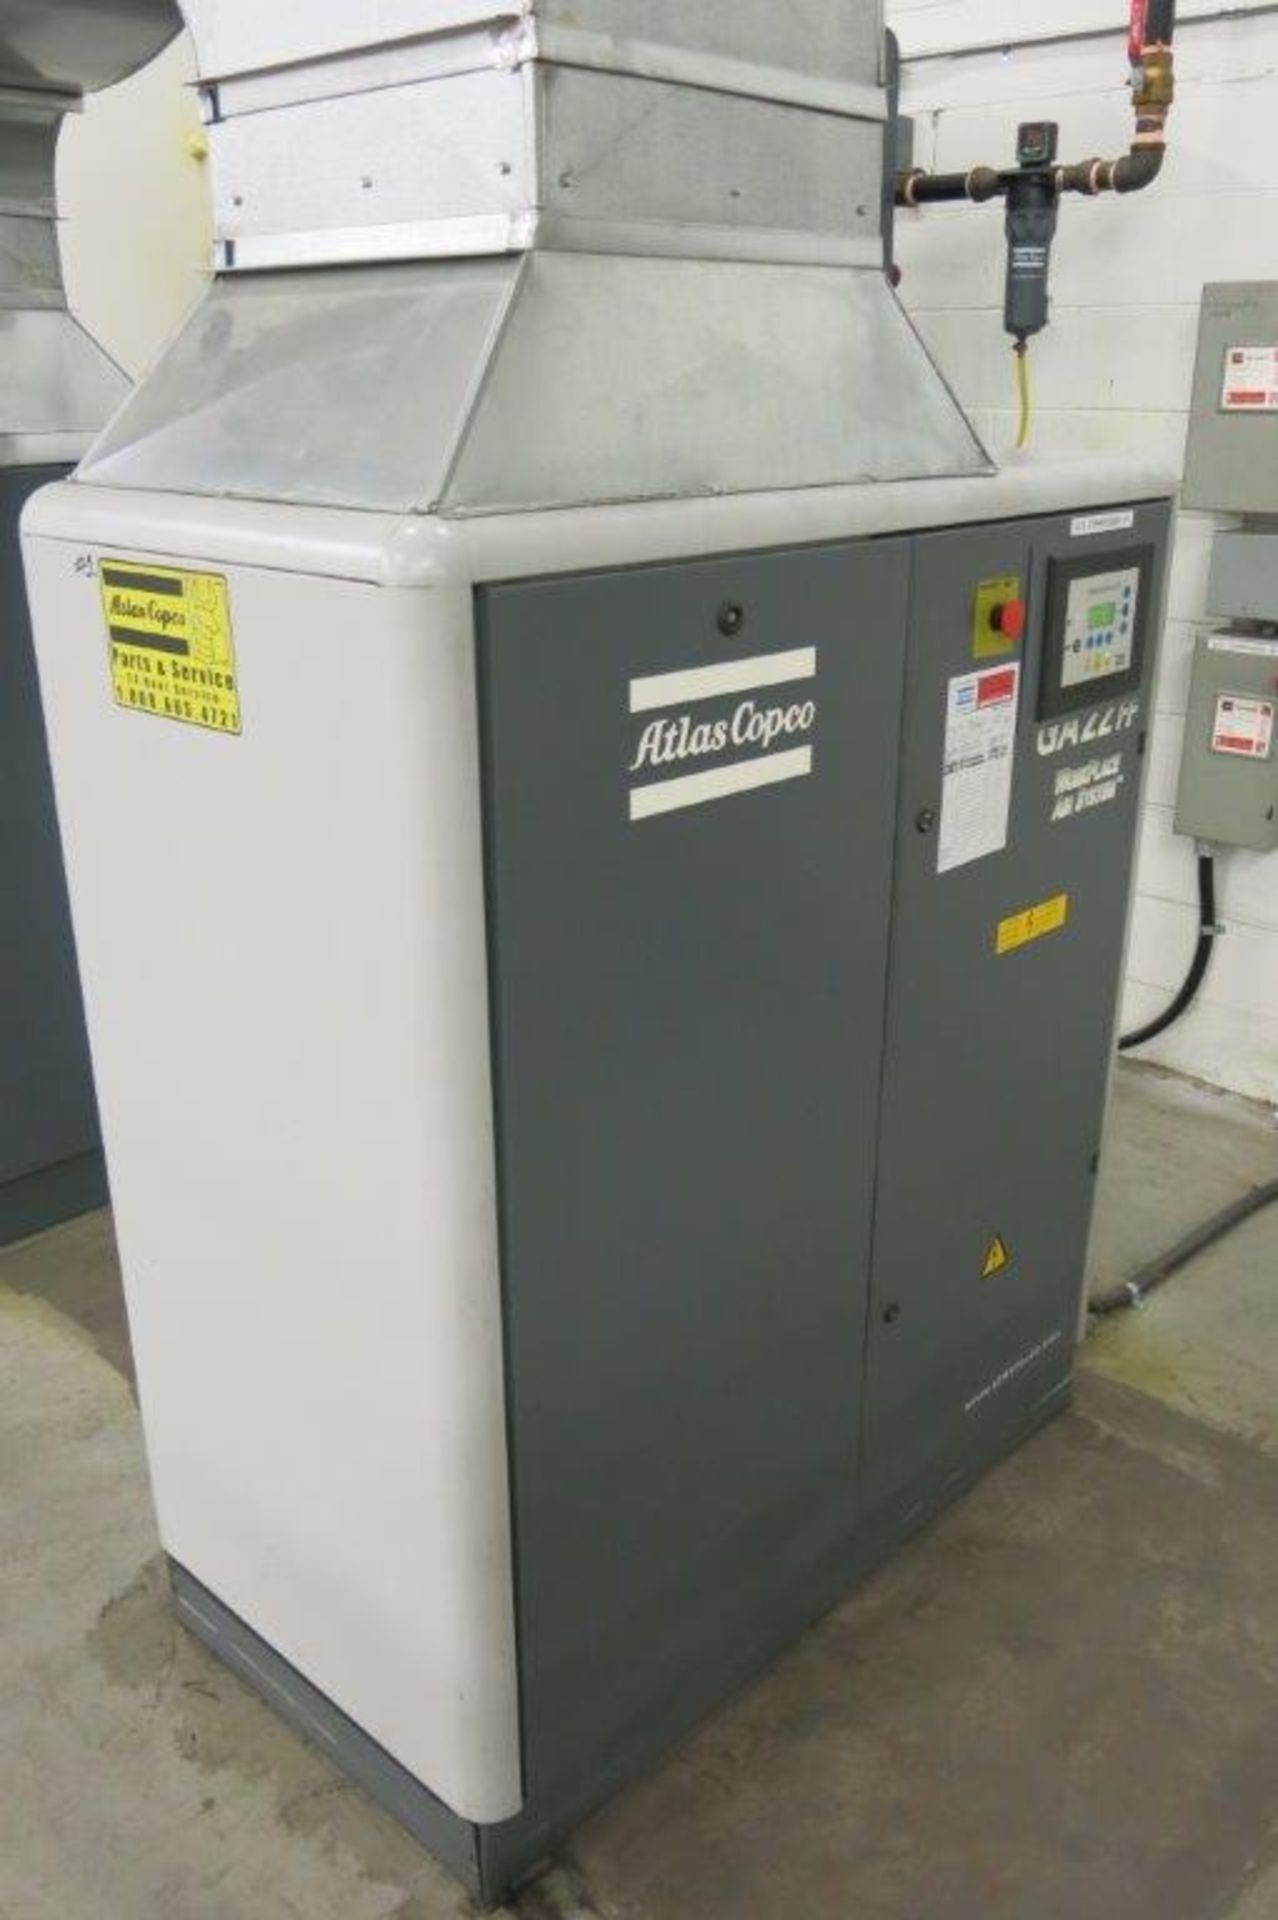 ATLAS COPCO, GA22, 30 HP, ROTARY SCREW AIR COMPRESSOR, 2001, S/N AII 261399, (RIGGER REQUIRED) - Image 2 of 5